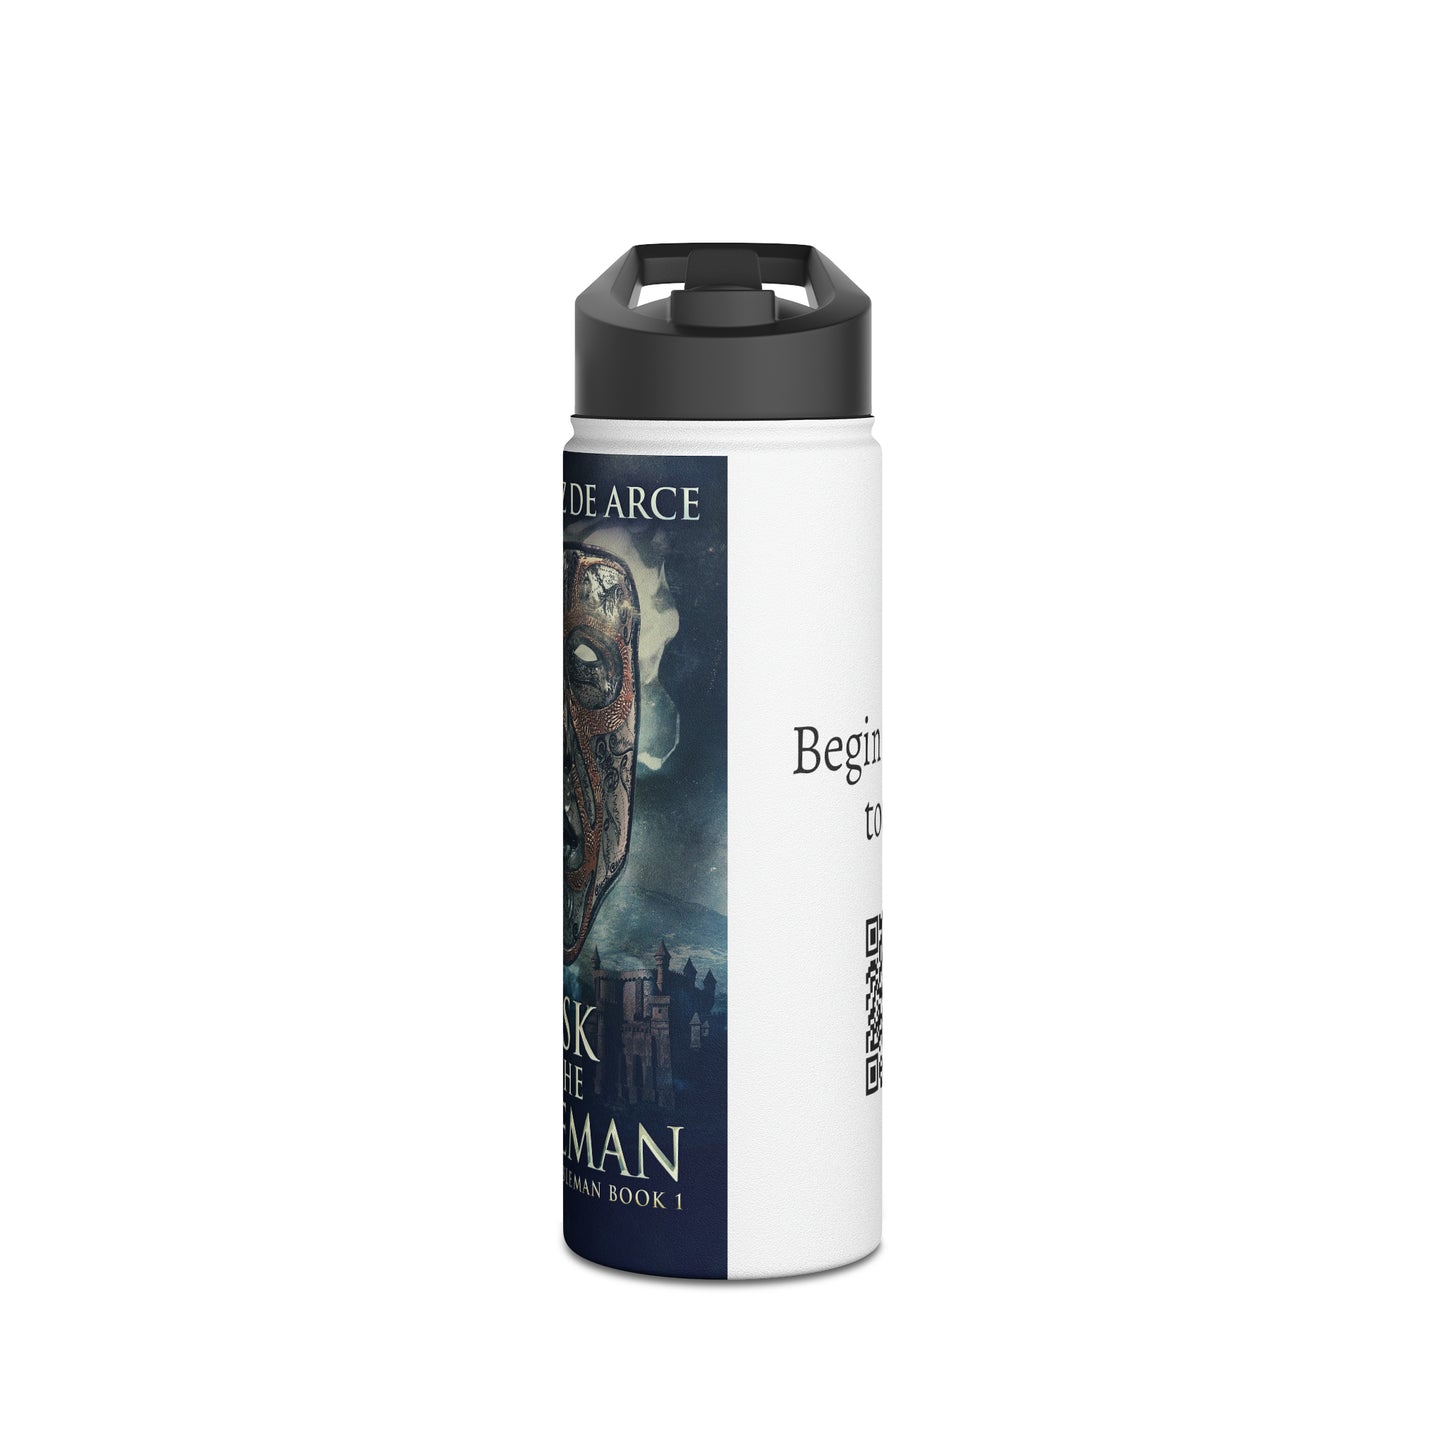 Mask Of The Nobleman - Stainless Steel Water Bottle